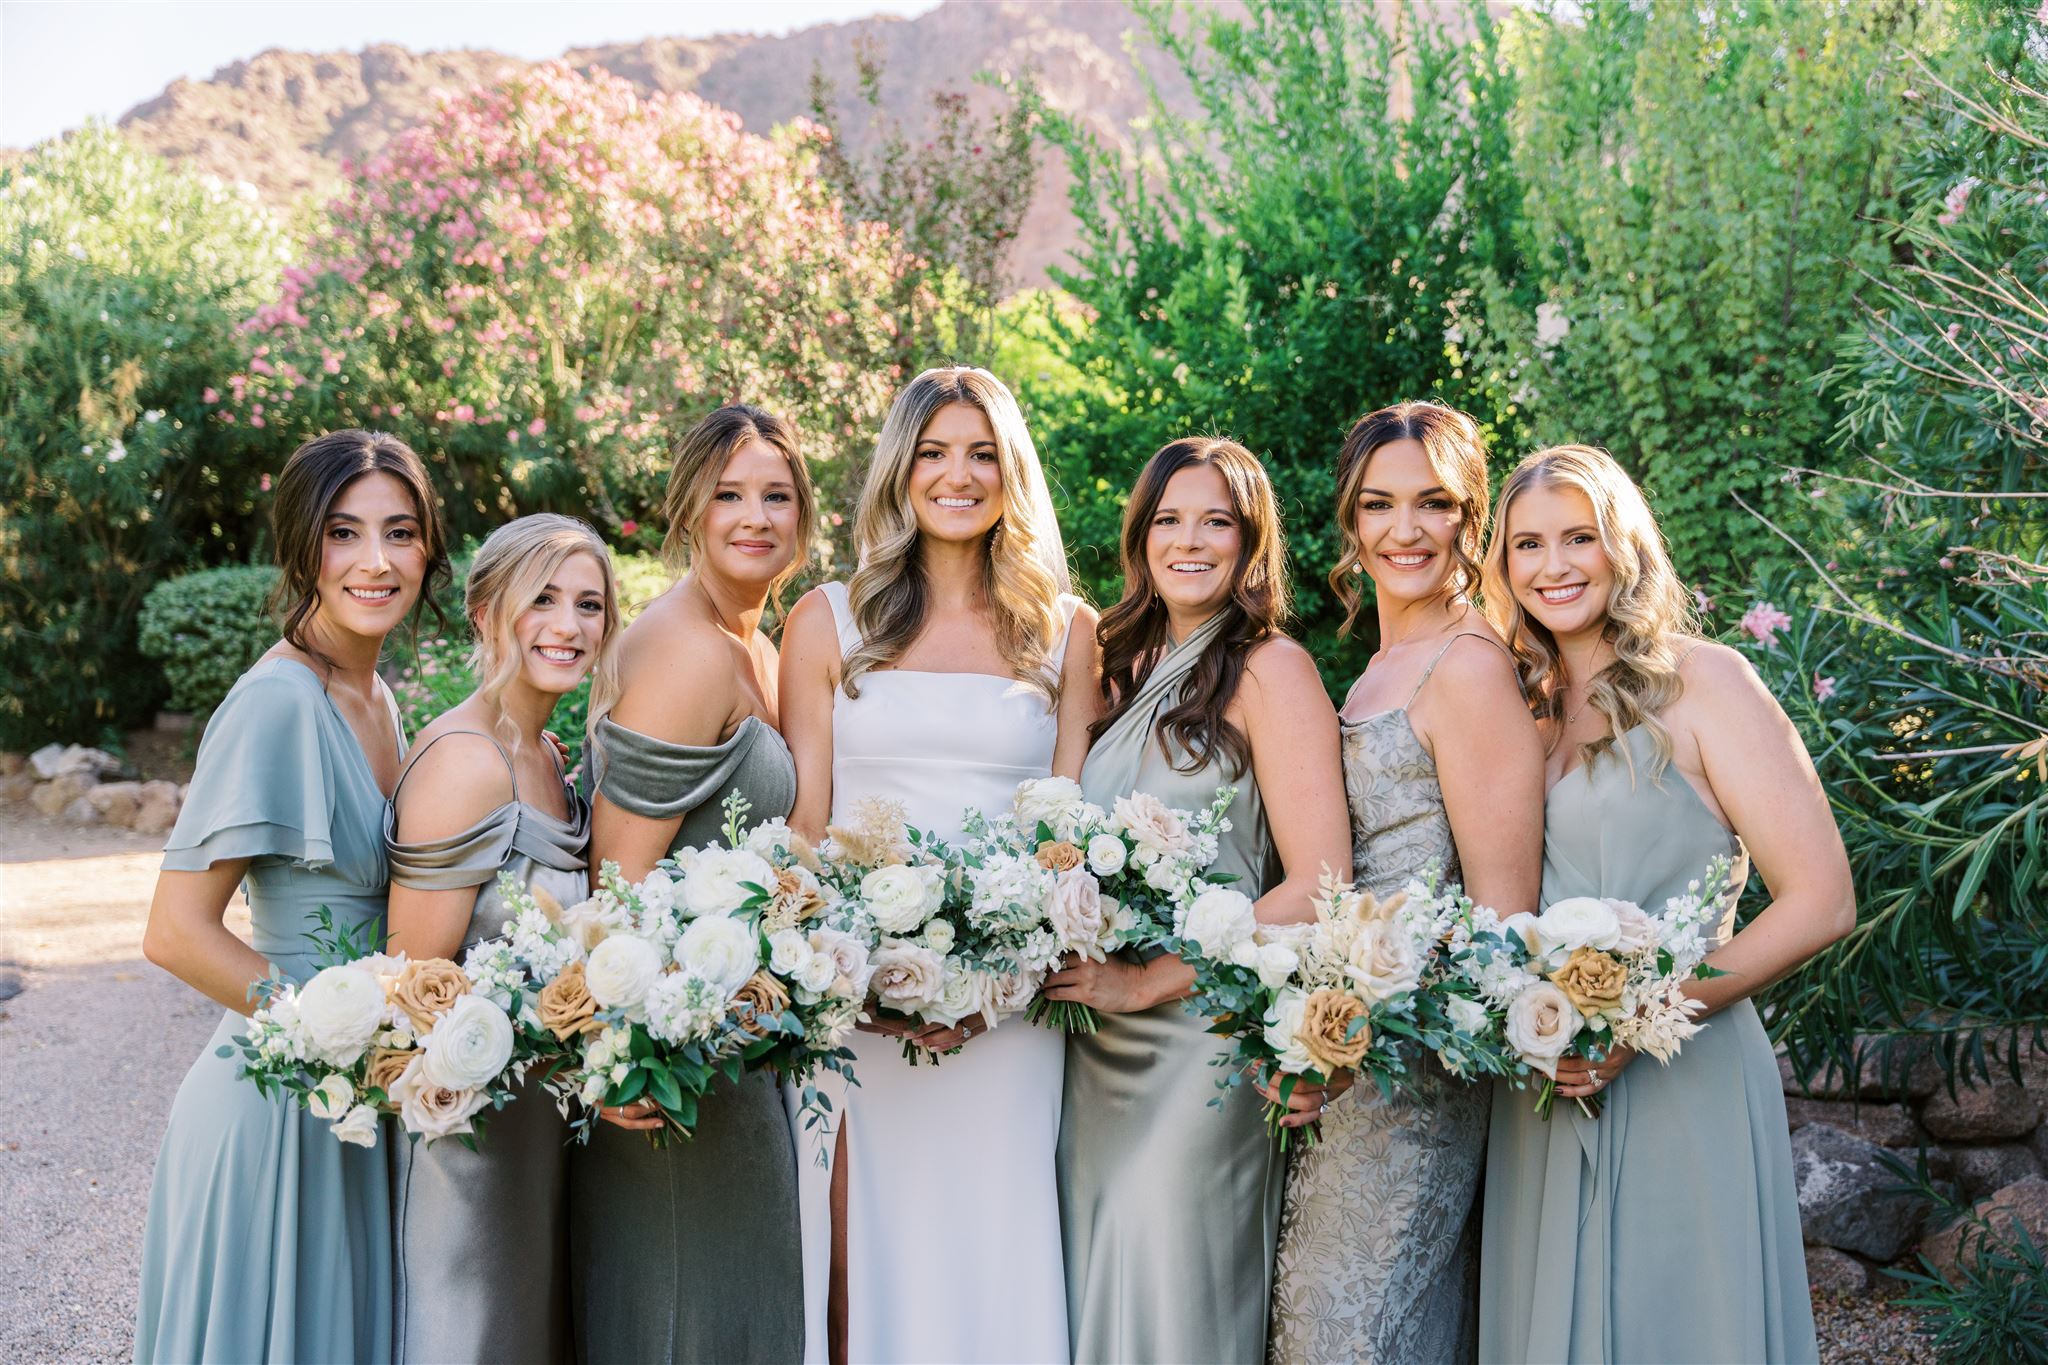 Bride standing with bridesmaids all smiling, in a line all holding bouquets in desert landscape.